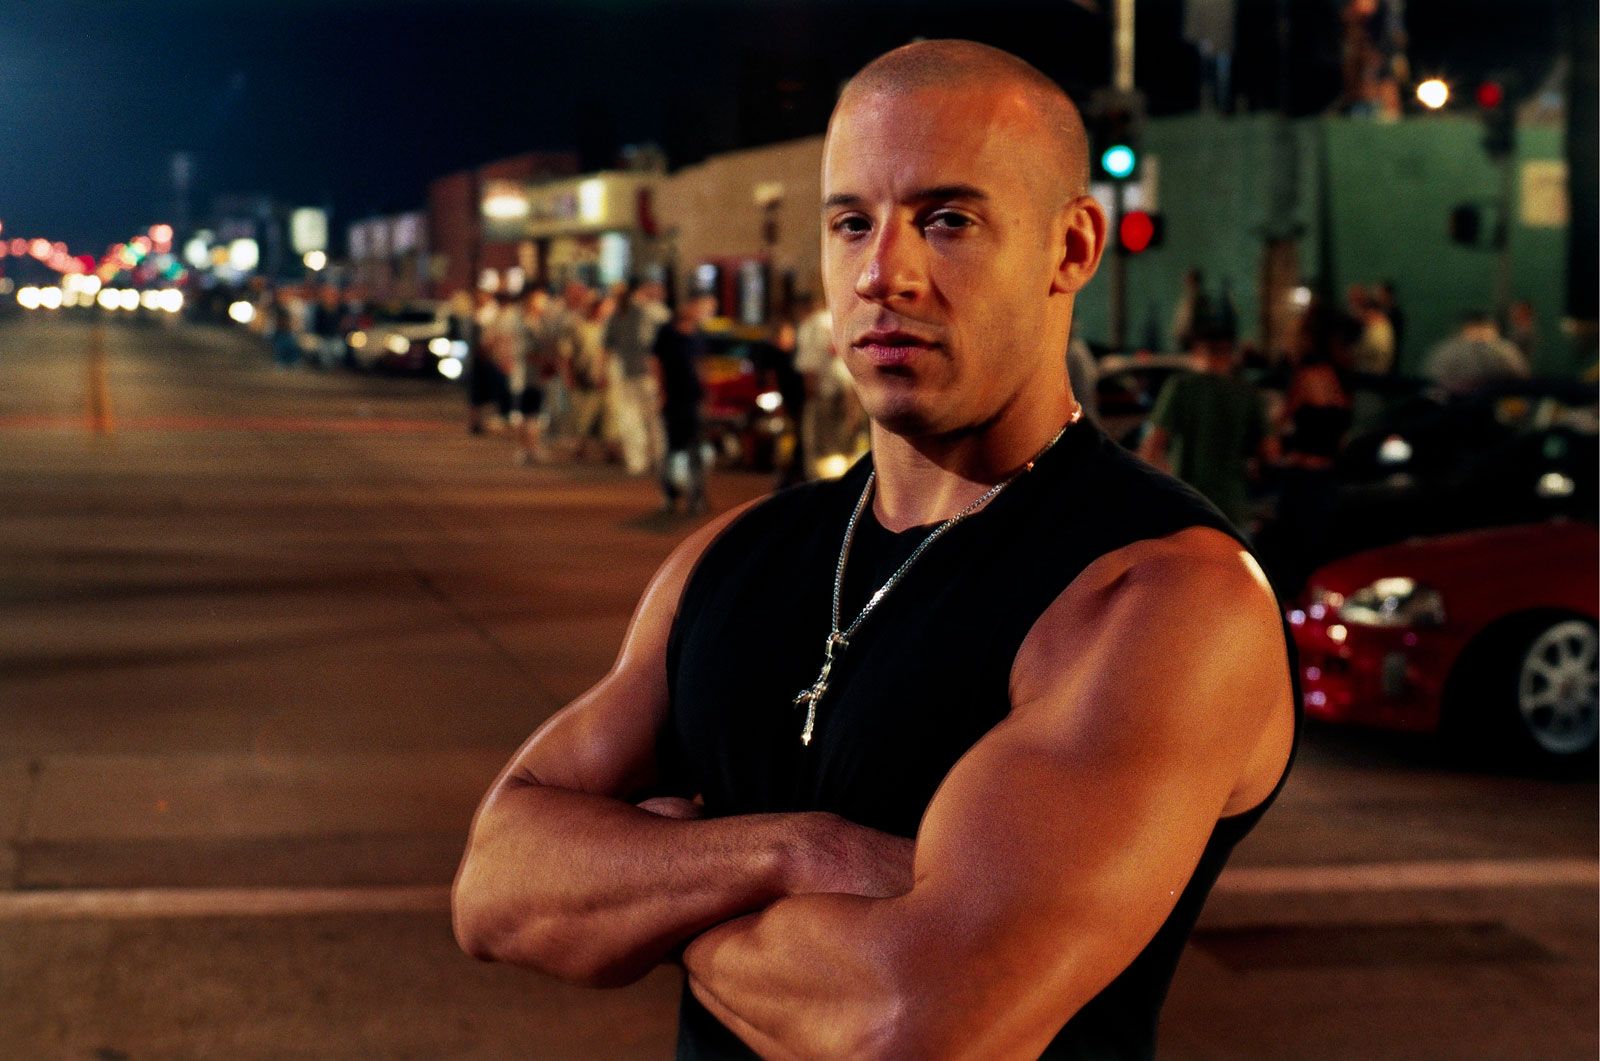 Vin-Diesel-The-Fast-and-the-Furious.jpg